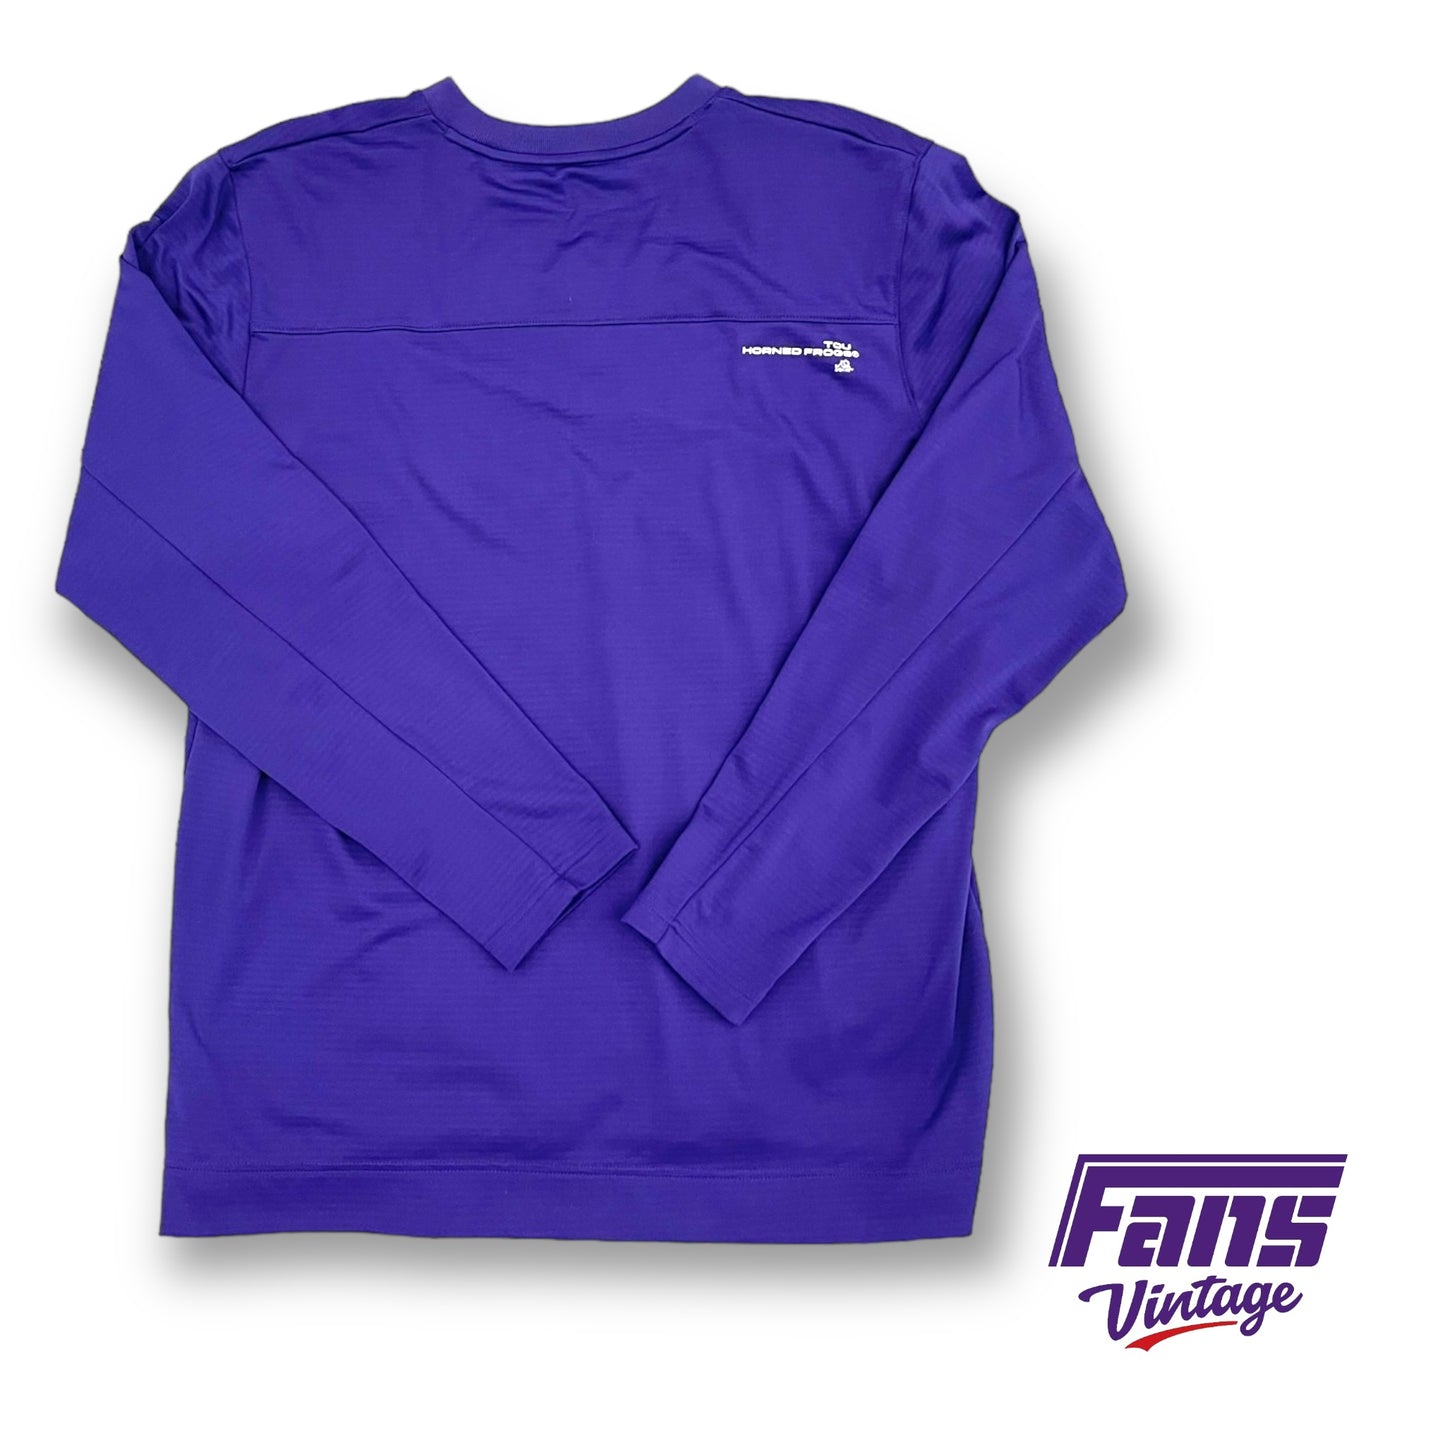 Premium TCU “On Field” Nike Sideline Crewneck Sweater with awesome details!